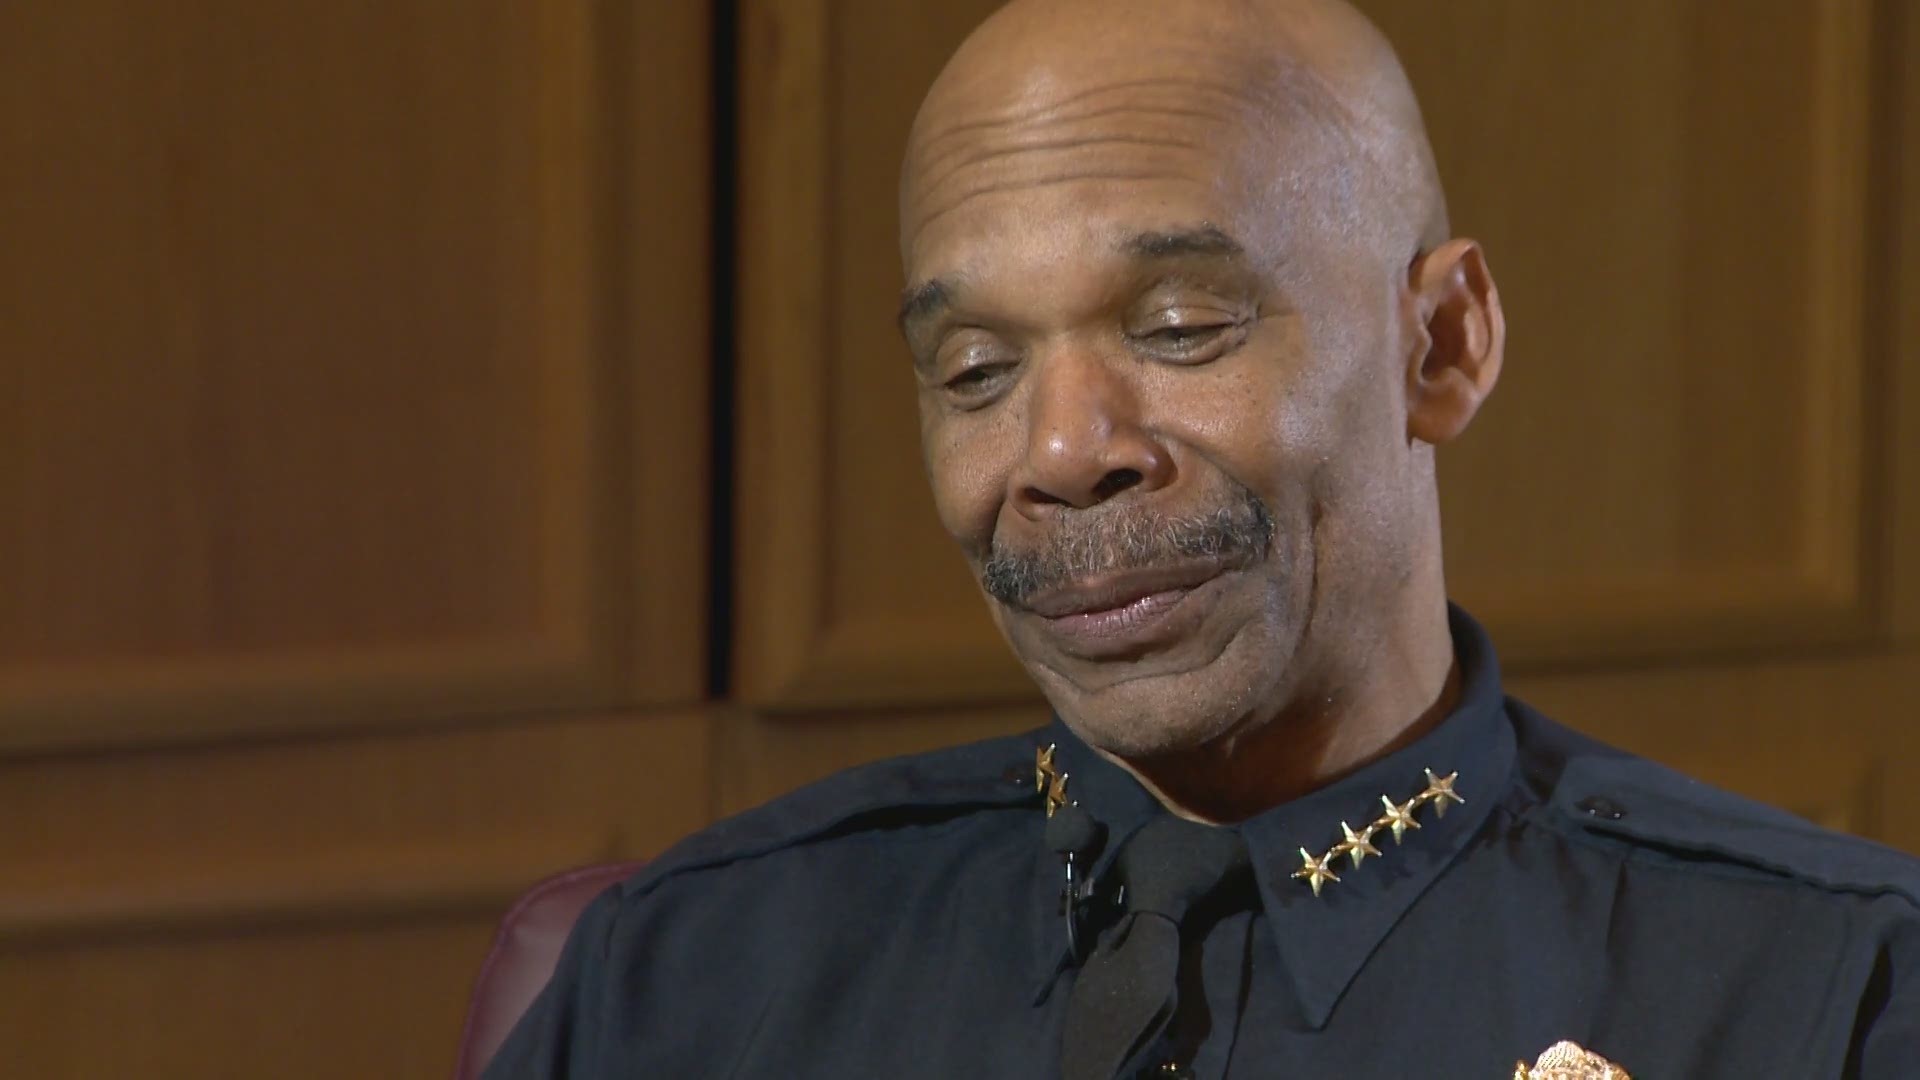 After nearly seven years leading the department, Denver Police Chief Robert White announced he is leaving DPD and will retire upon the appointment of the next police chief.